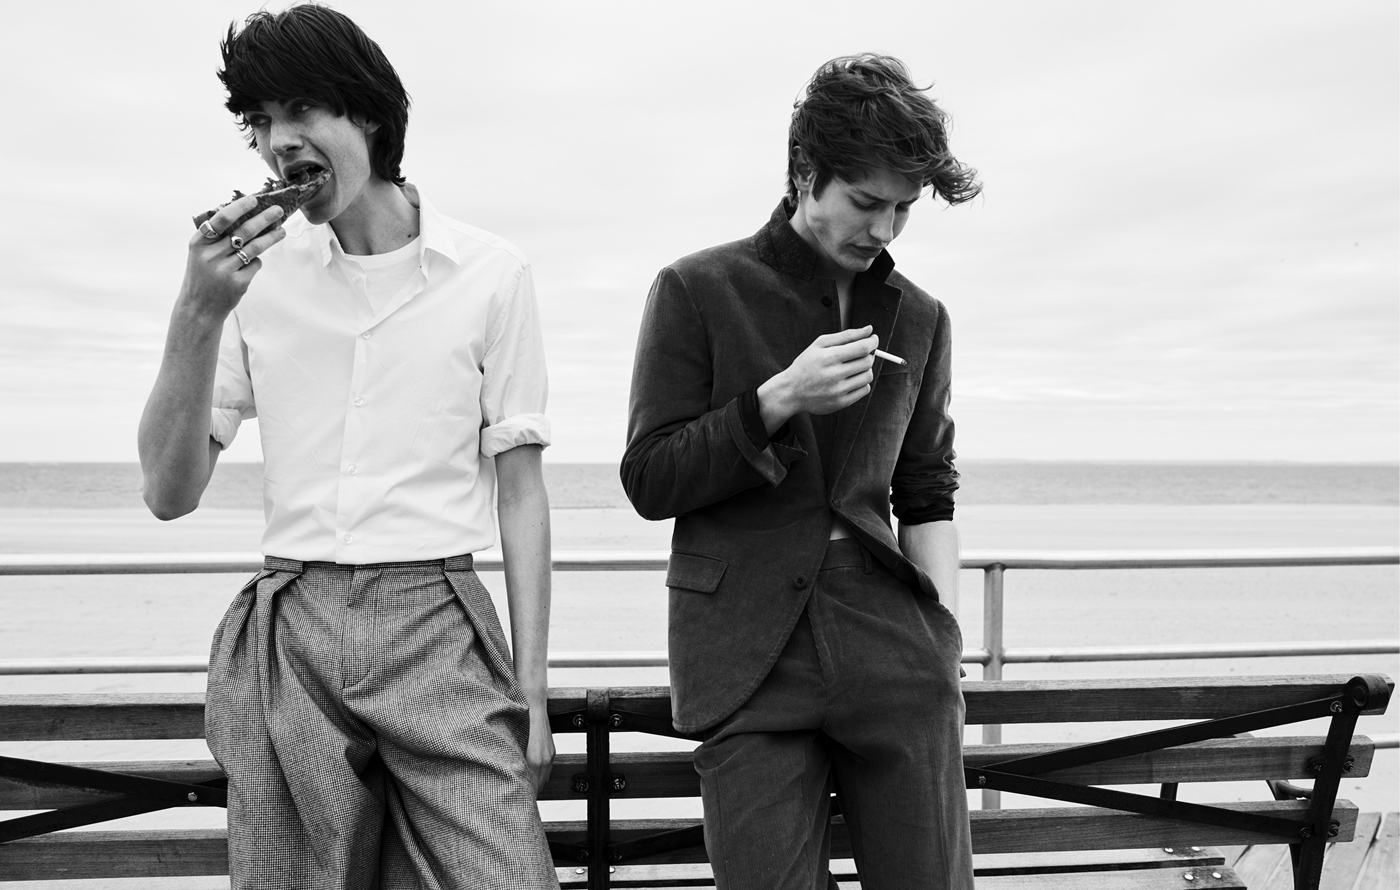 From left: Payne wears shirt and t-shirt by Gap. Trousers by Giorgio Armani. All jewelry, model's own. Nathan Morgan wears all clothing by Childs.